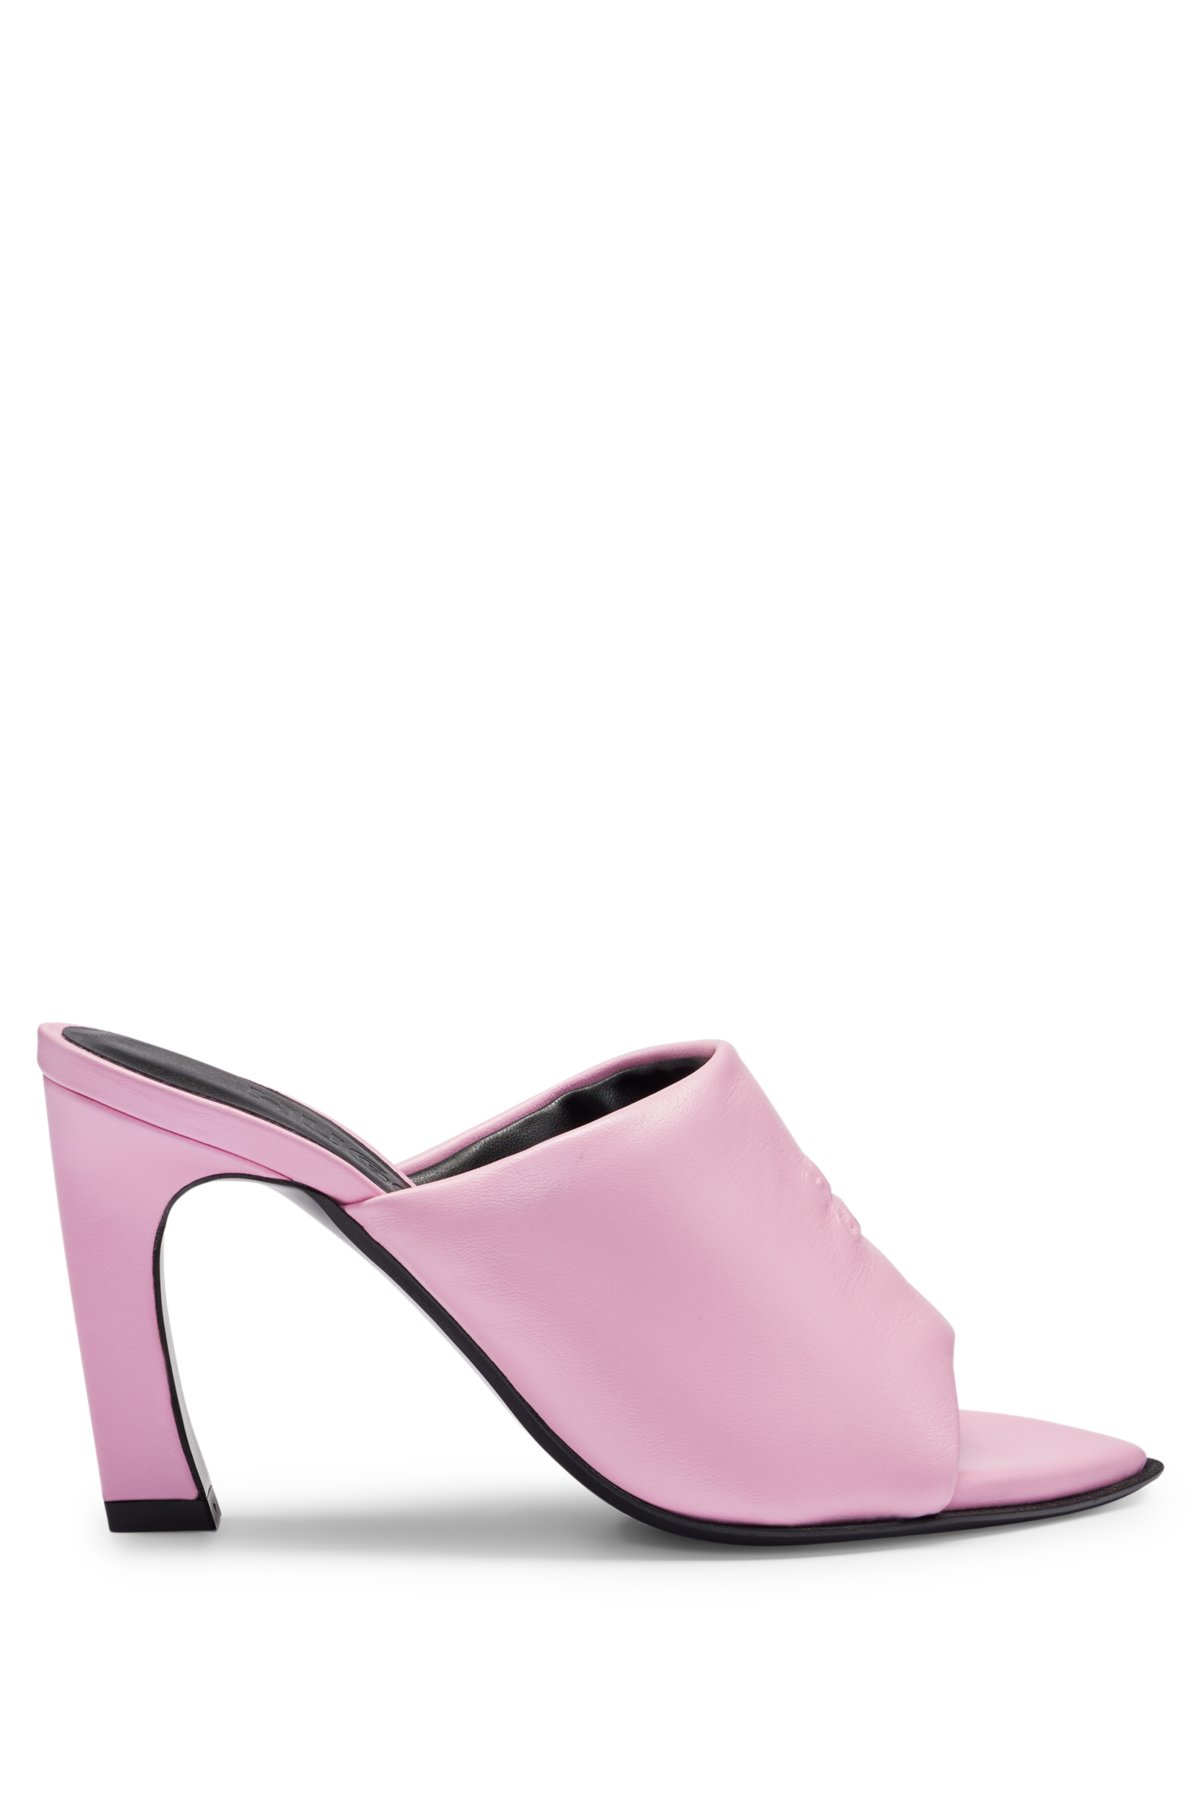 Padded-leather mules with stacked logo and open toe, light pink